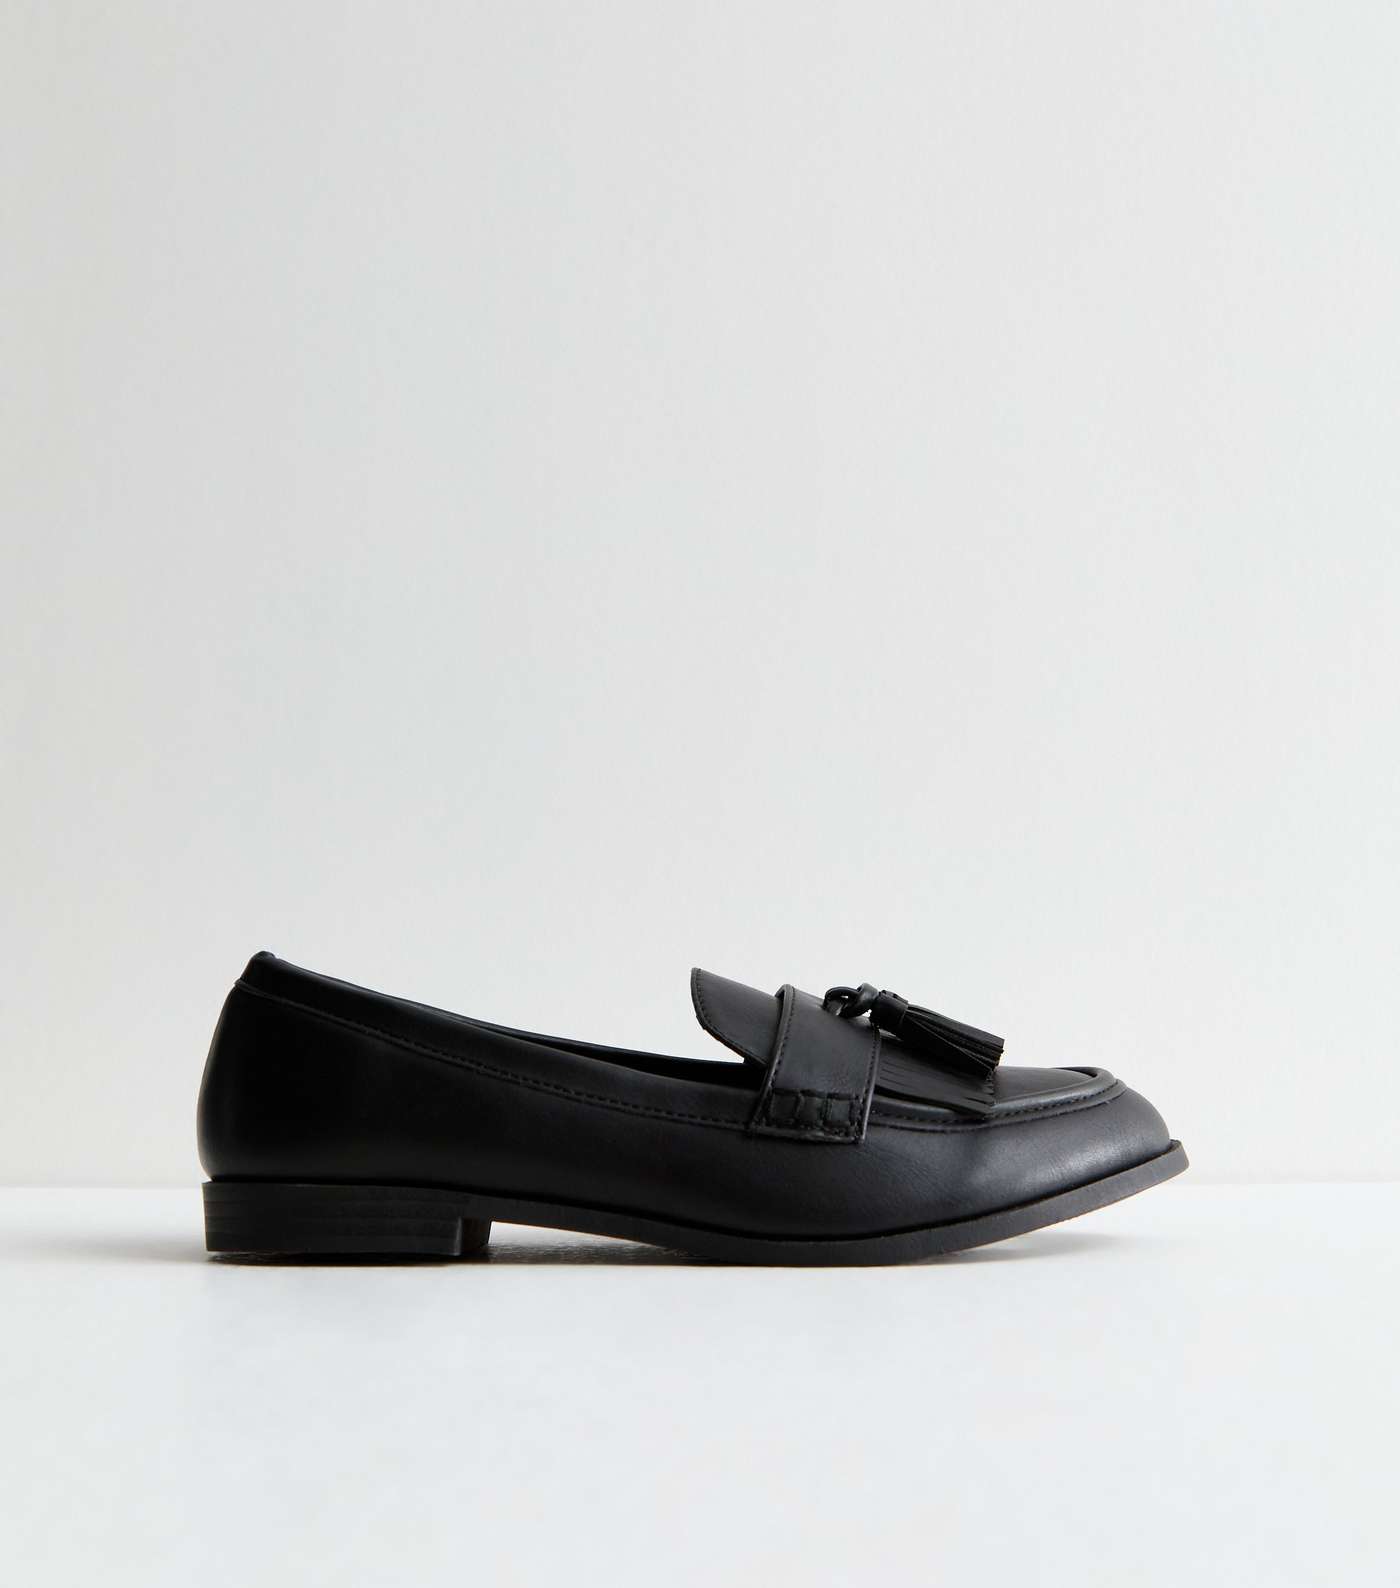 Wide Fit Black Leather-Look Tassel Front Loafers Image 5